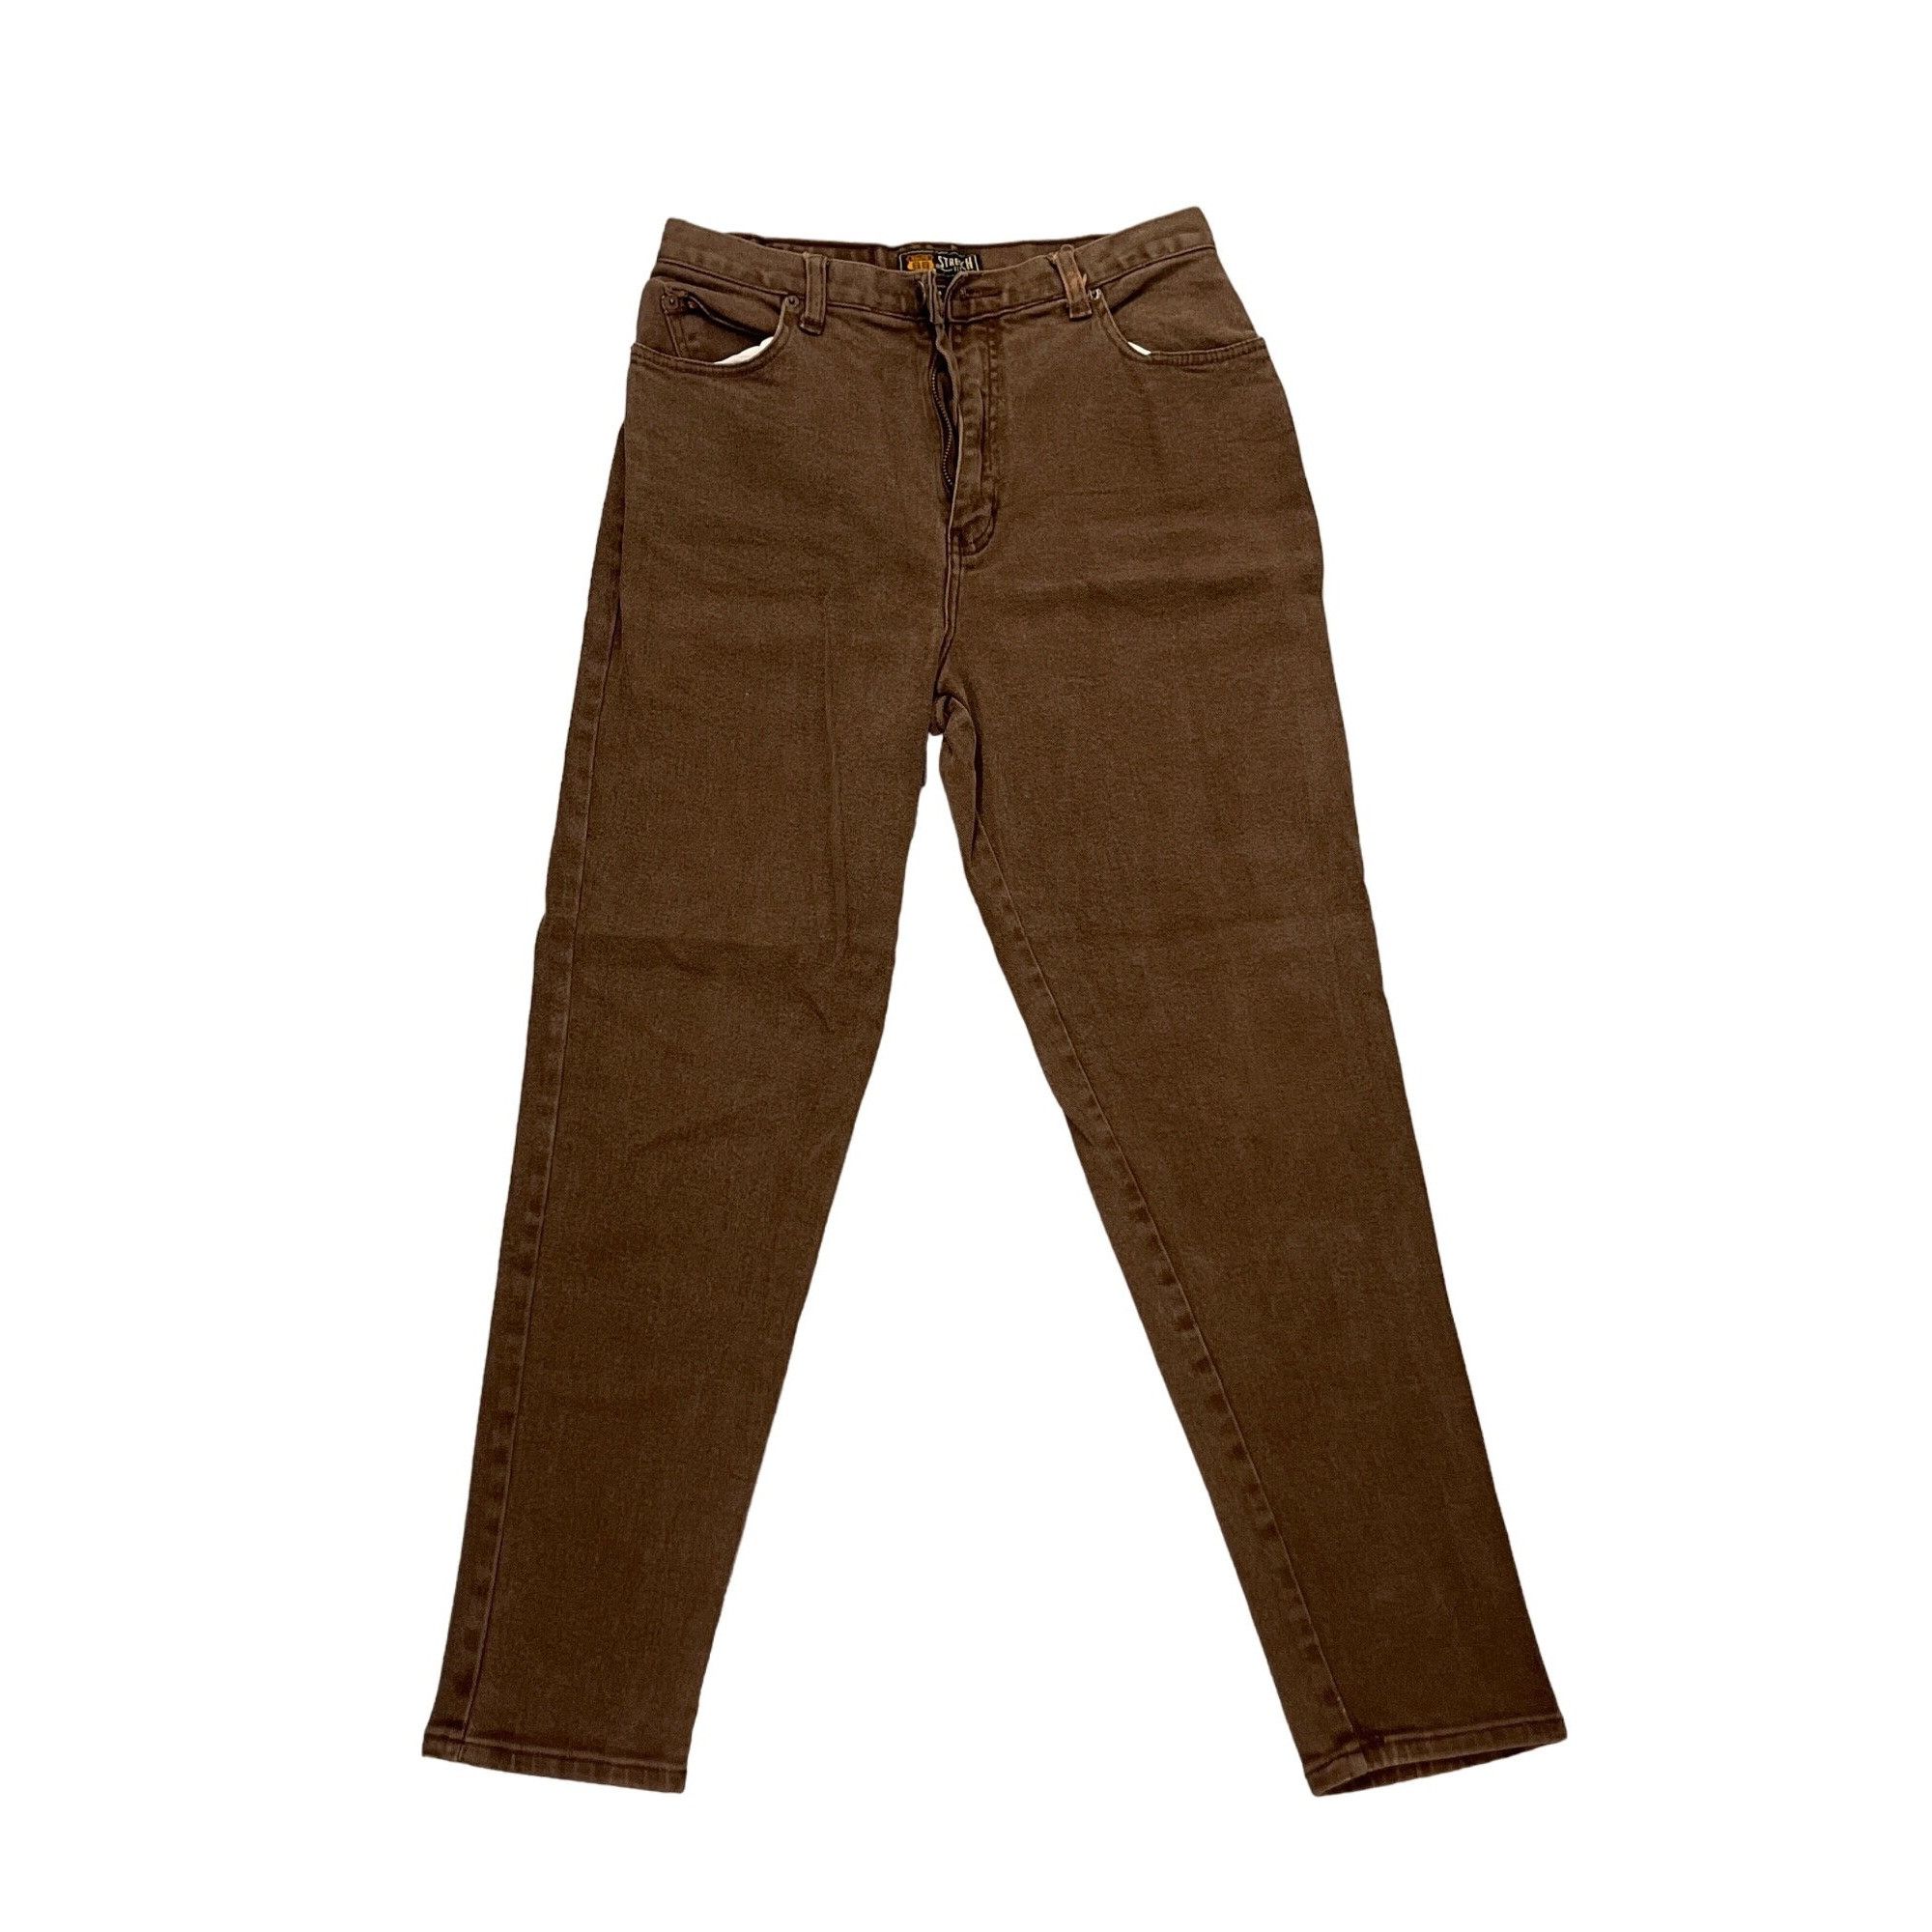 Route 66 Route 66 Stretch Brown Pants Size 13/14 | Grailed